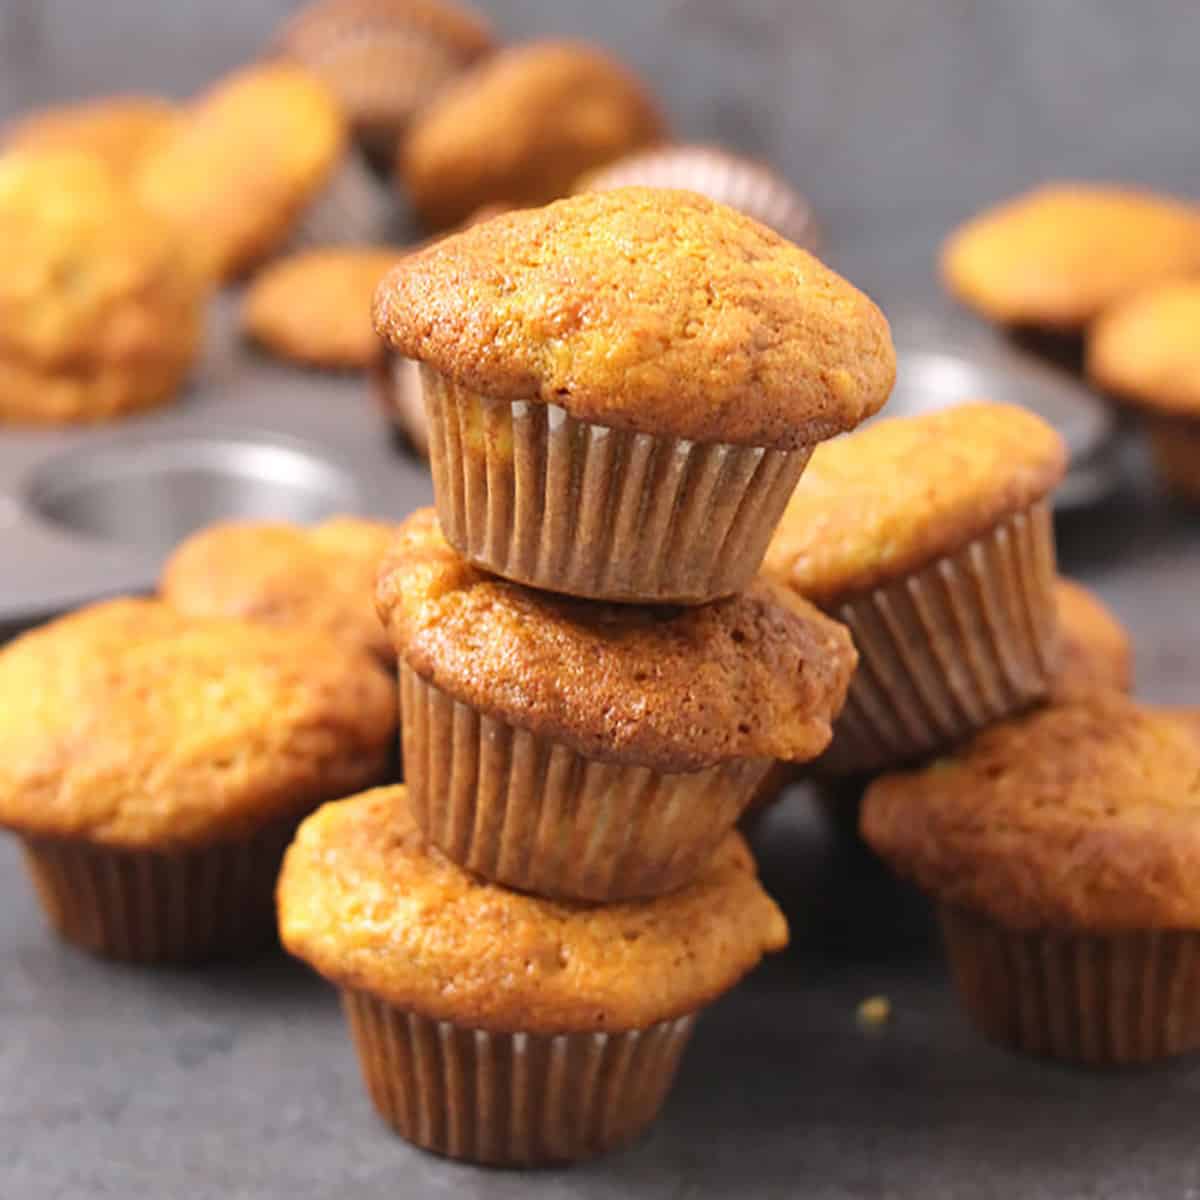 moist banana muffins stacked on each other, with many in the background.